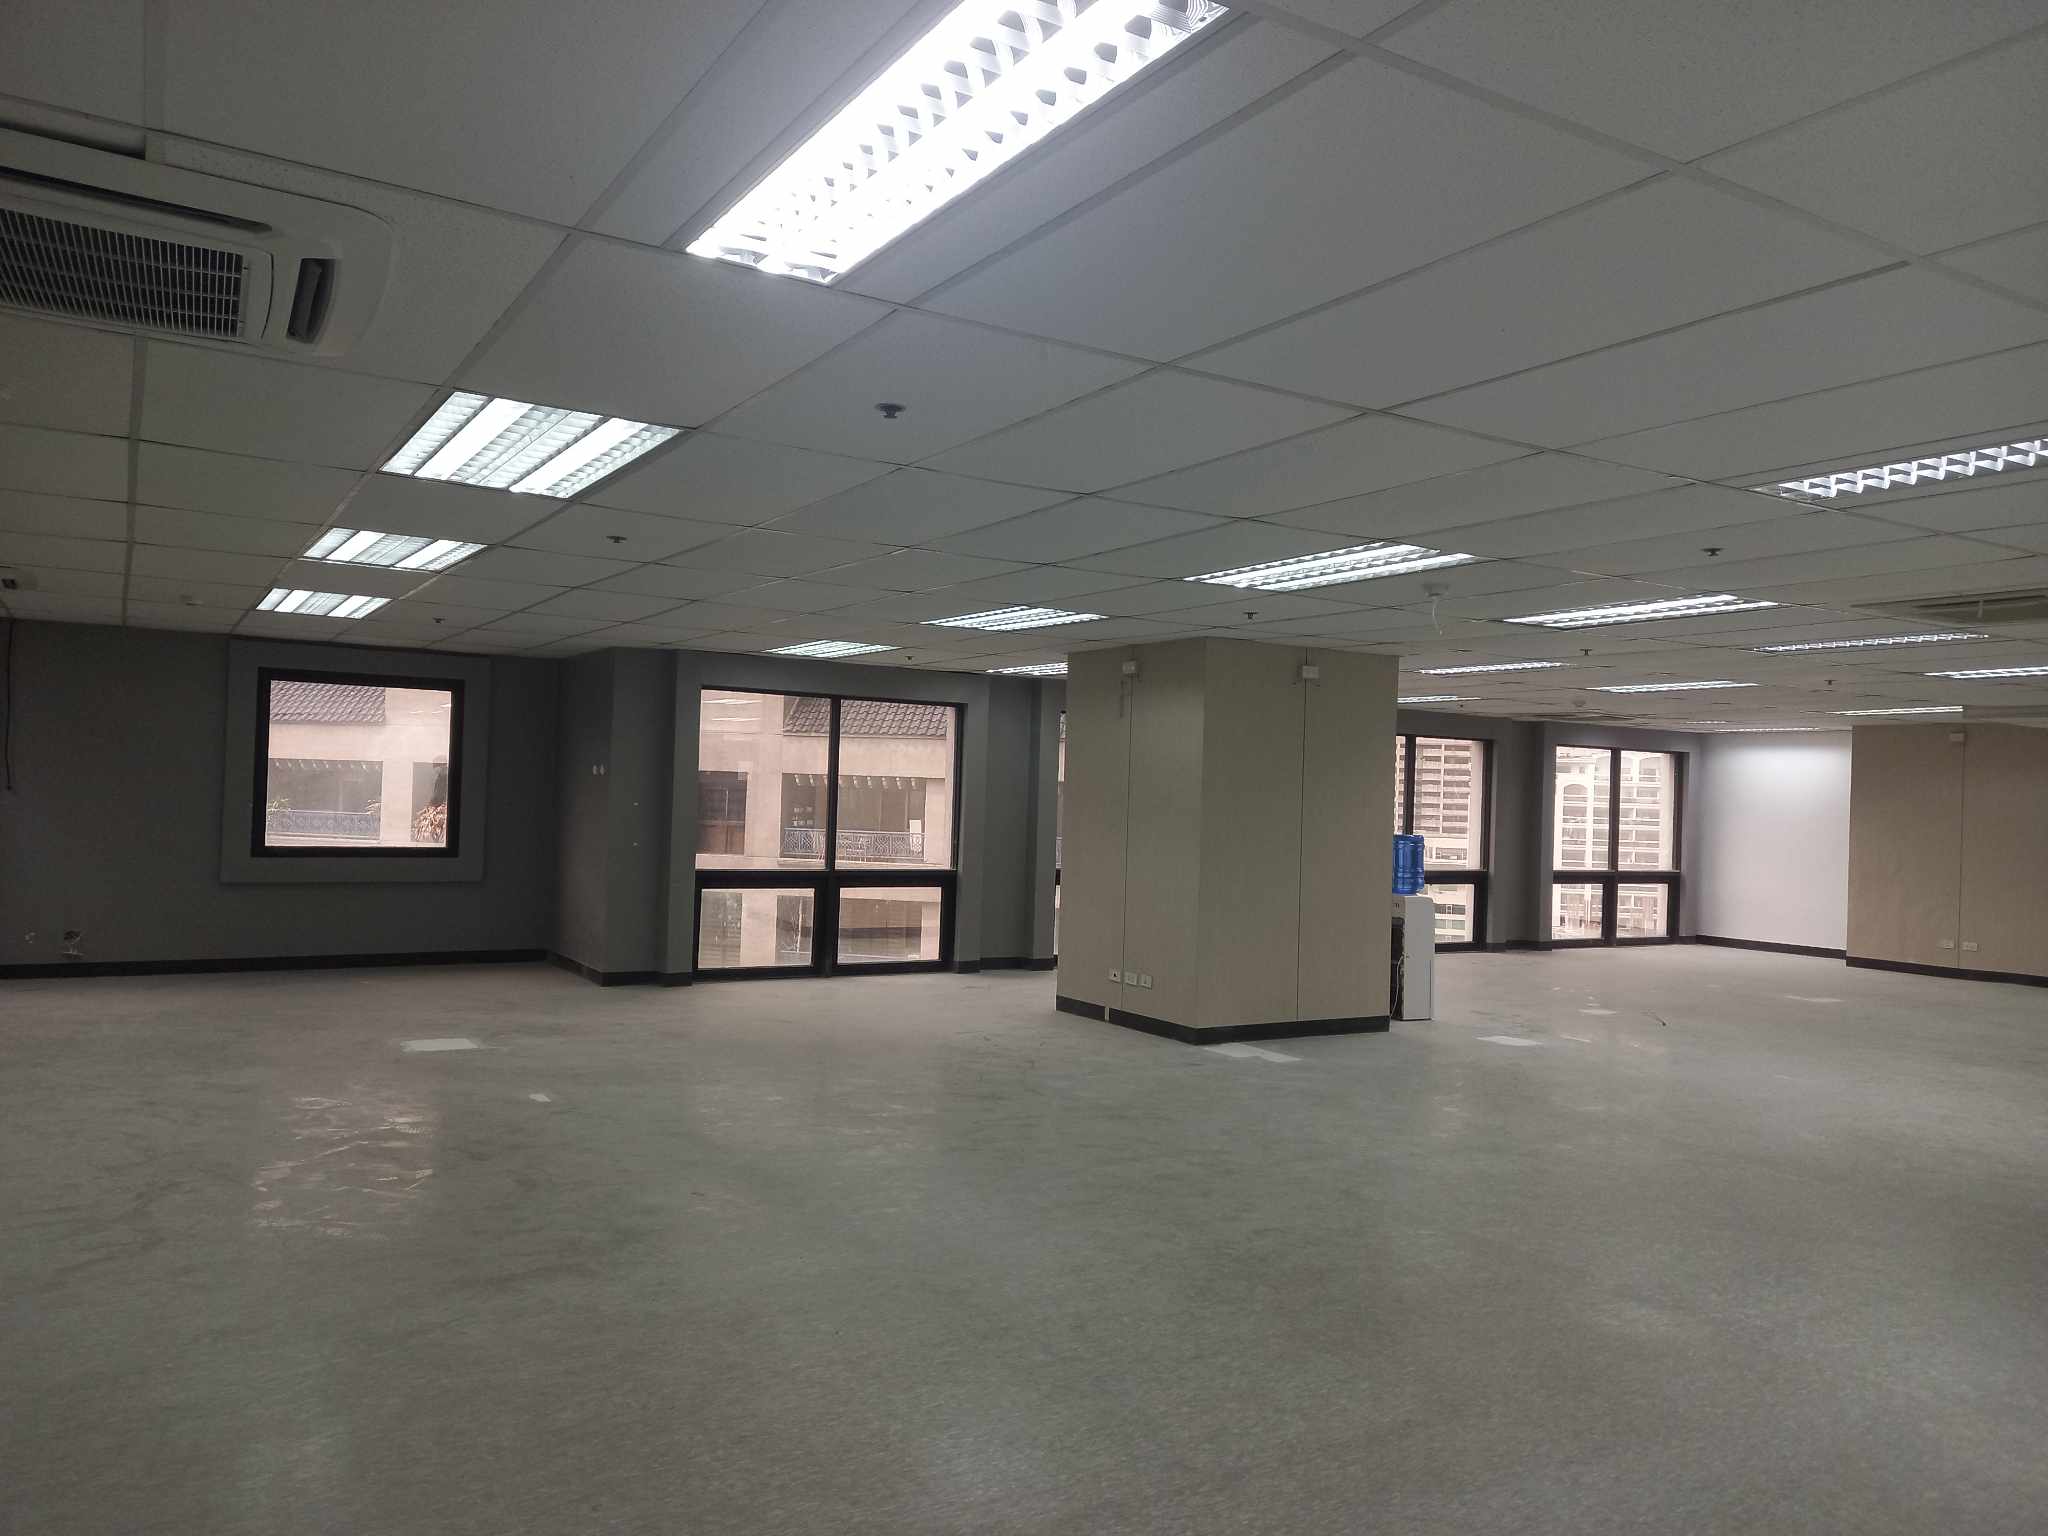 Office Space Rent Lease Ortigas Center Pasig City 269 sqm